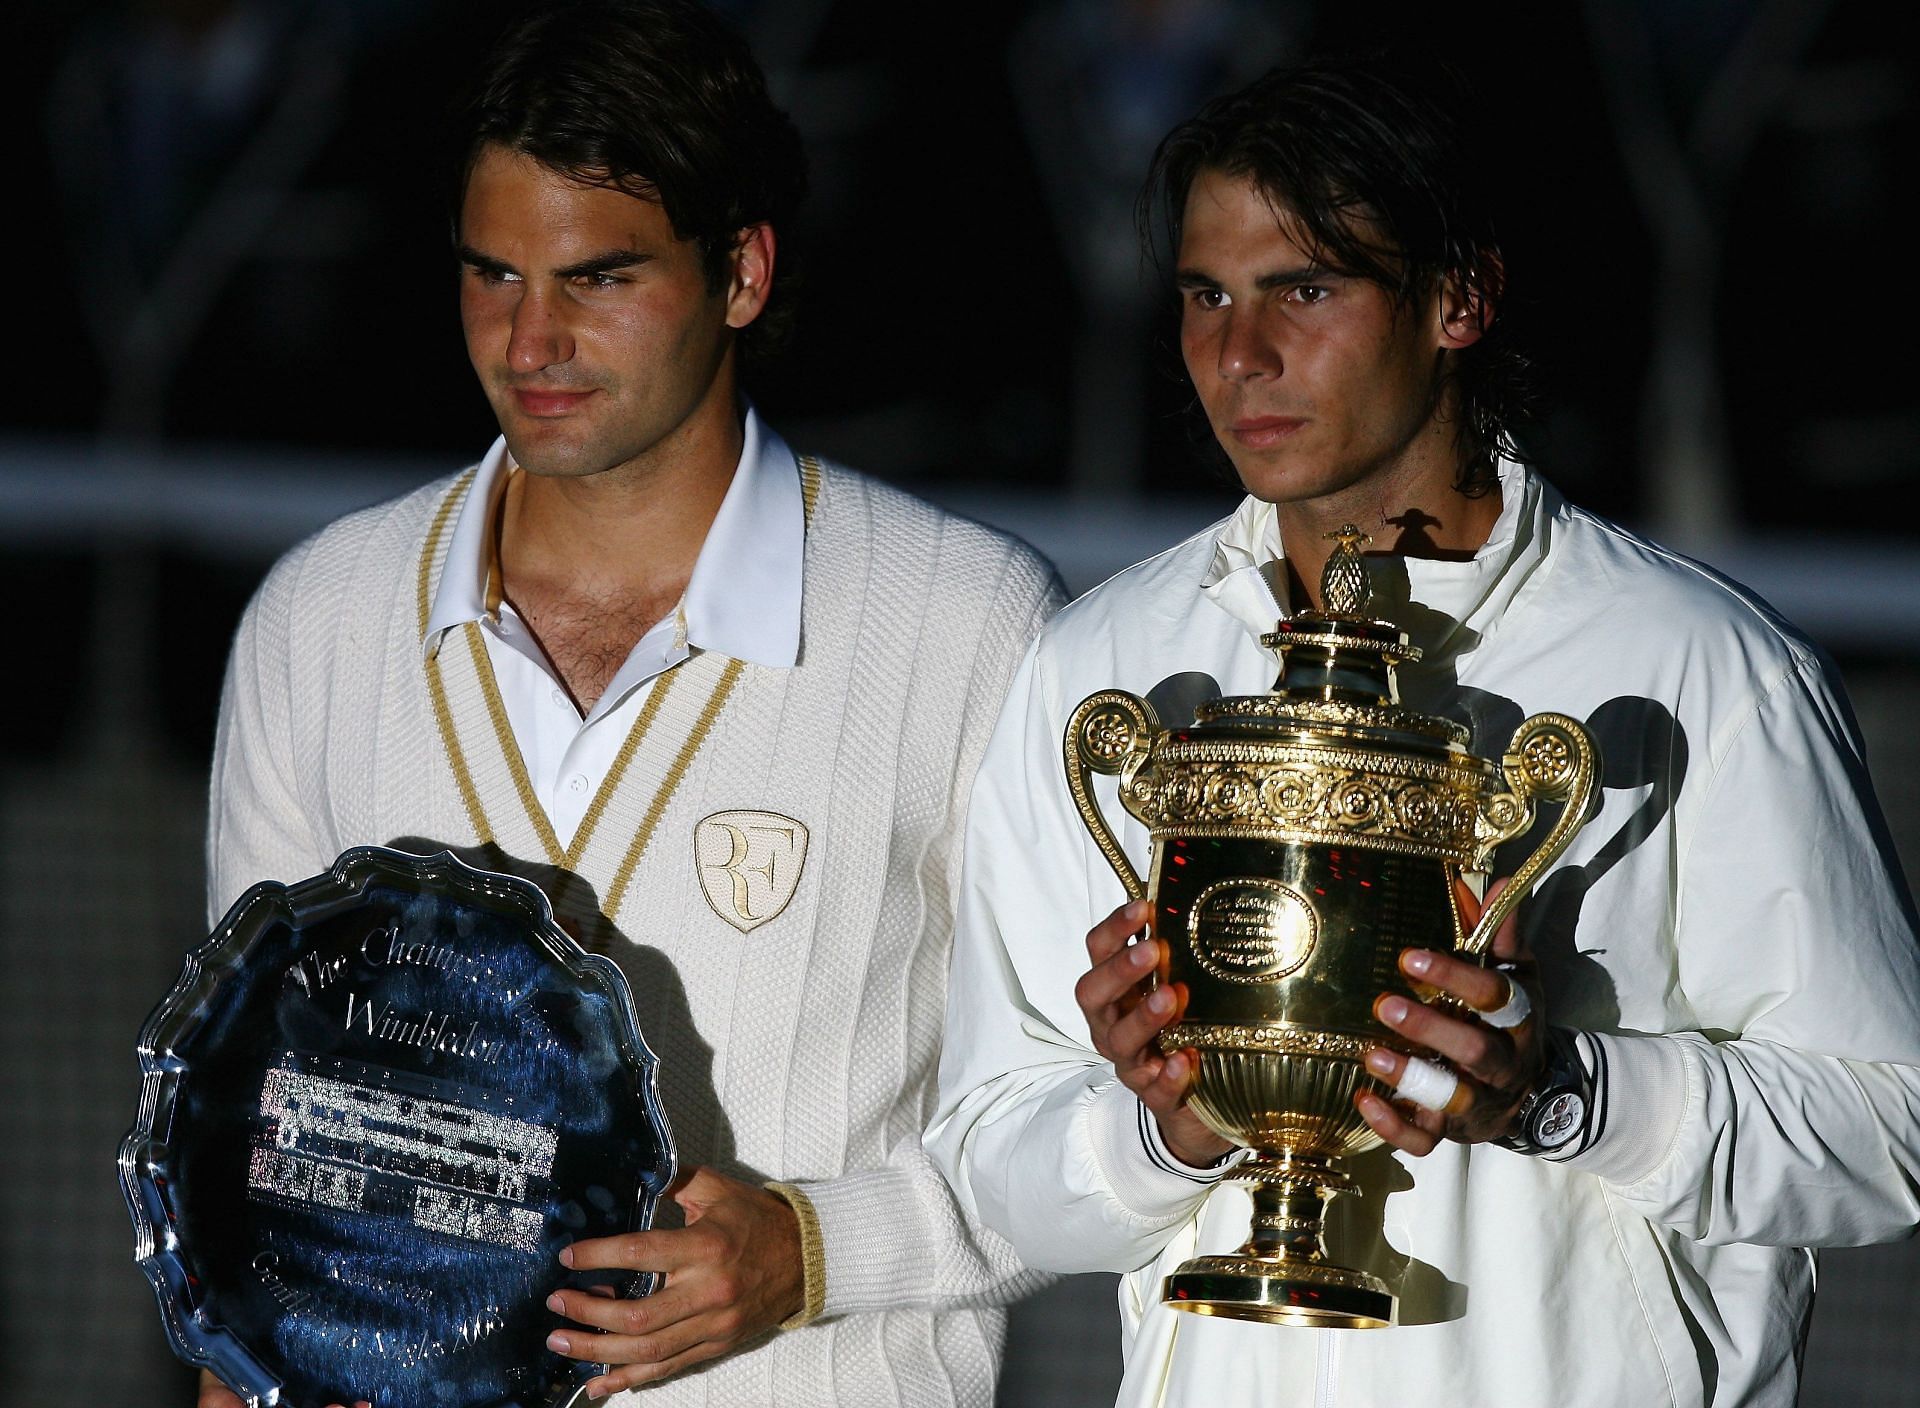 Roger Federer failed to win a sixth consecutive title at Wimbledon 2008